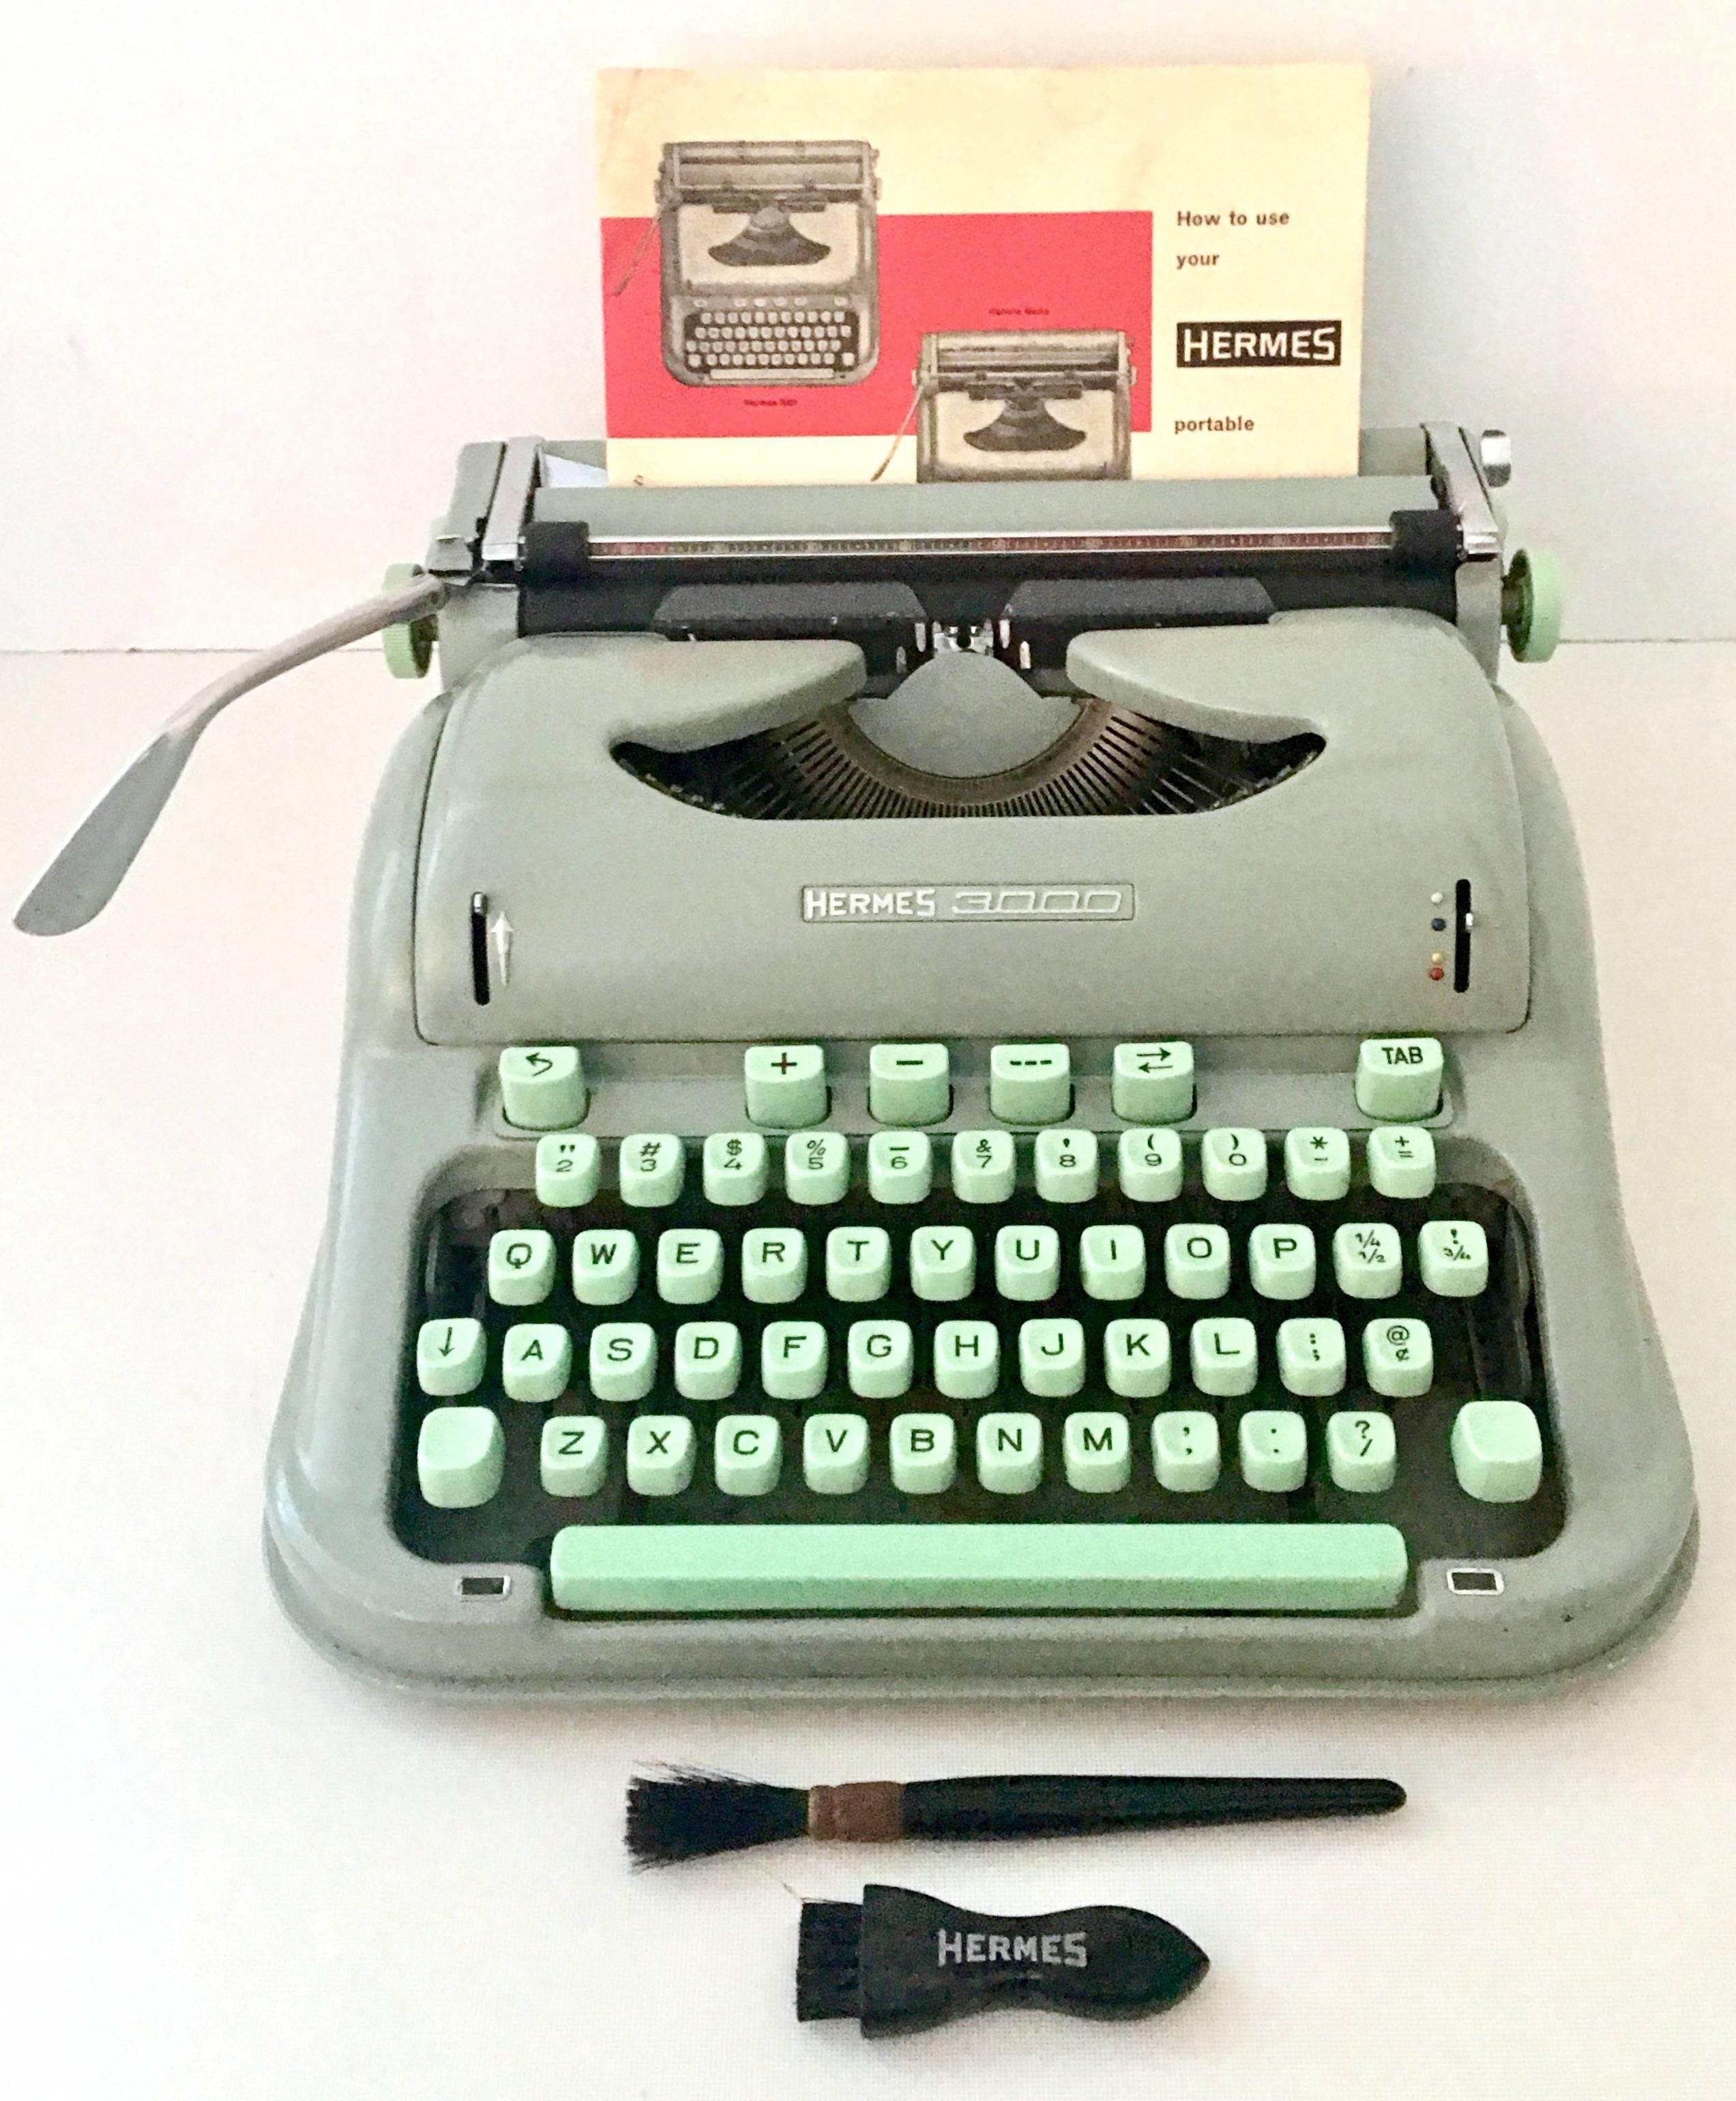 1950s Hermes 3000 mint green key portable typewriter made in Switzerland. The Hermes 3000, first introduced in 1958 and the first of several models to come, was innovative for its time. It was one of the first portable typewriters for "every